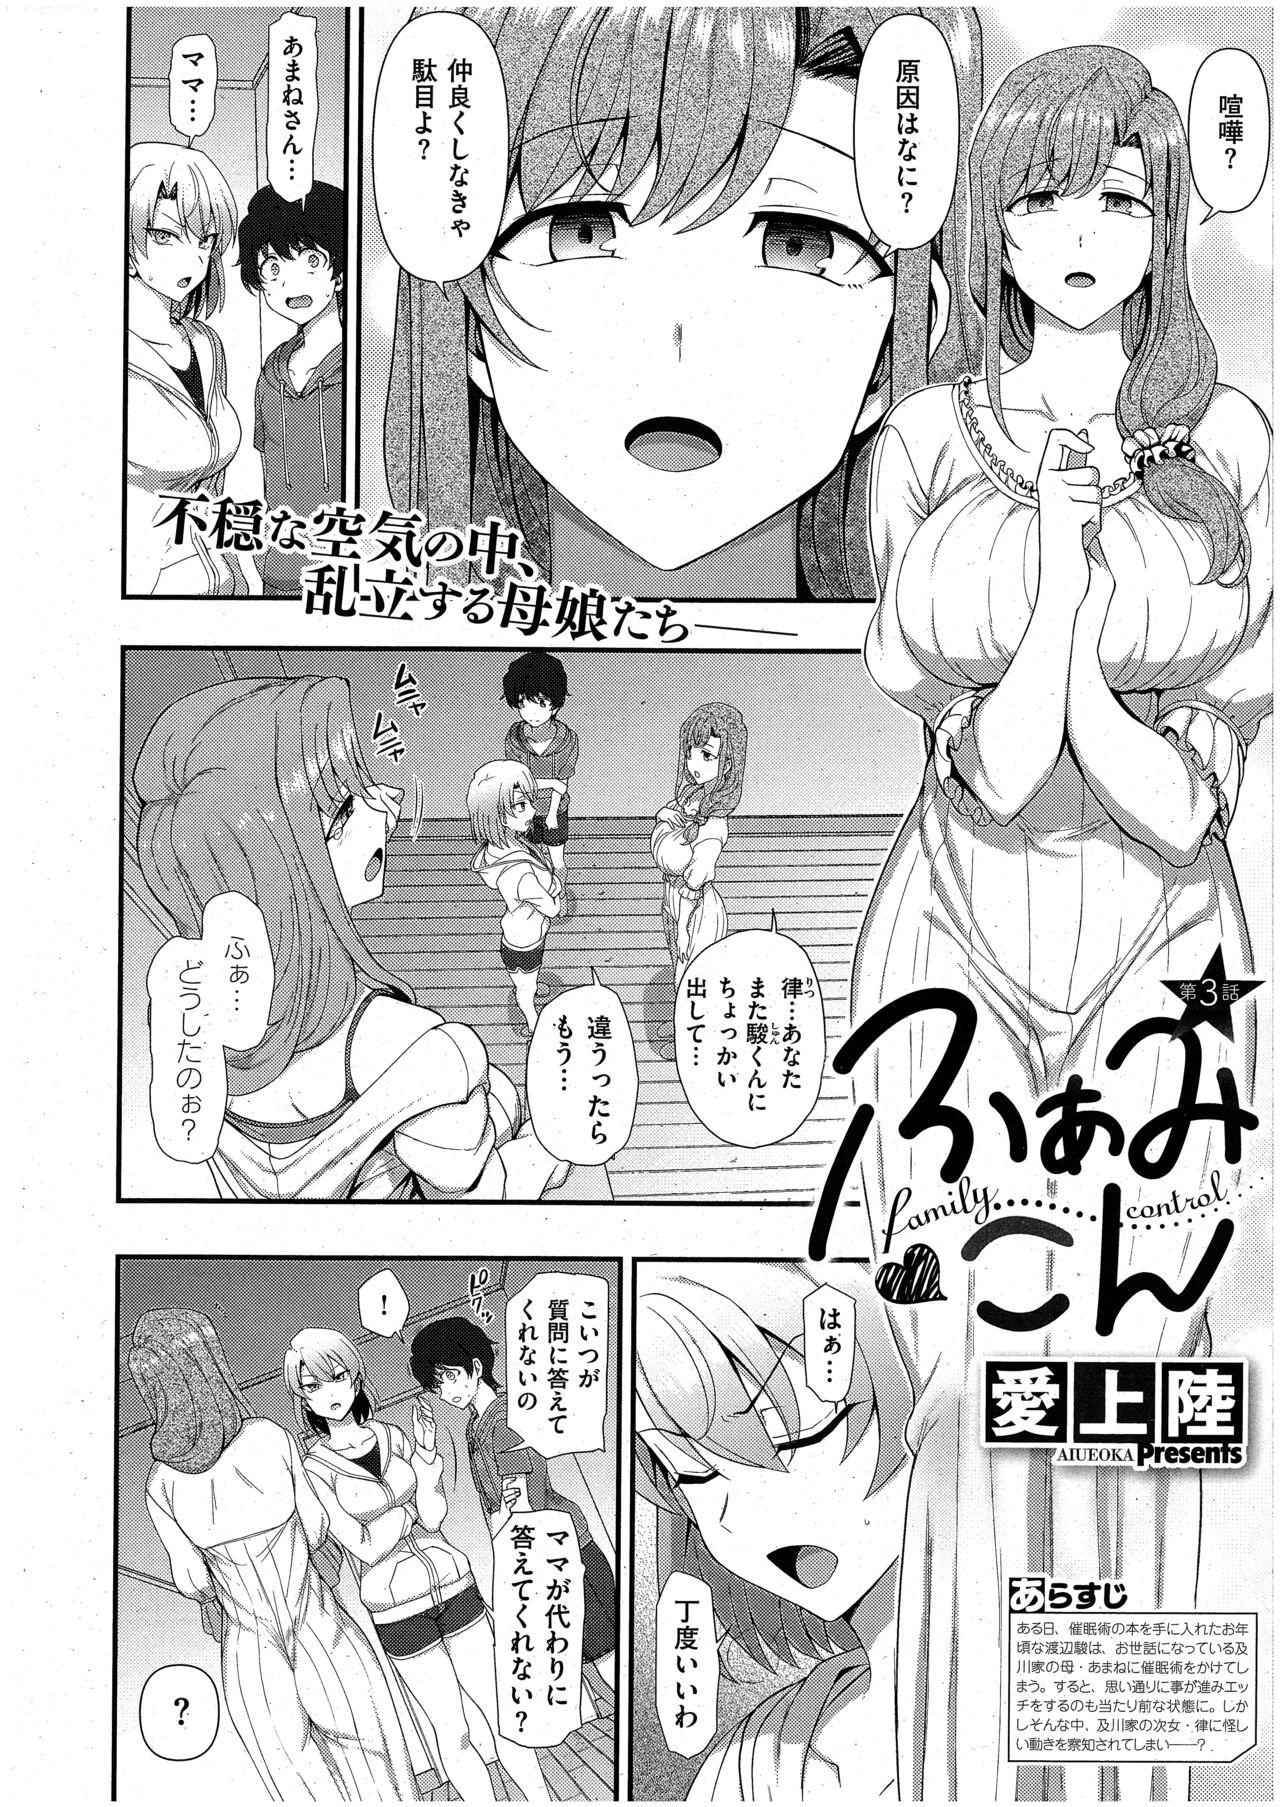 Francaise FamiCon - Family Control Ch. 3 18 Year Old - Page 2